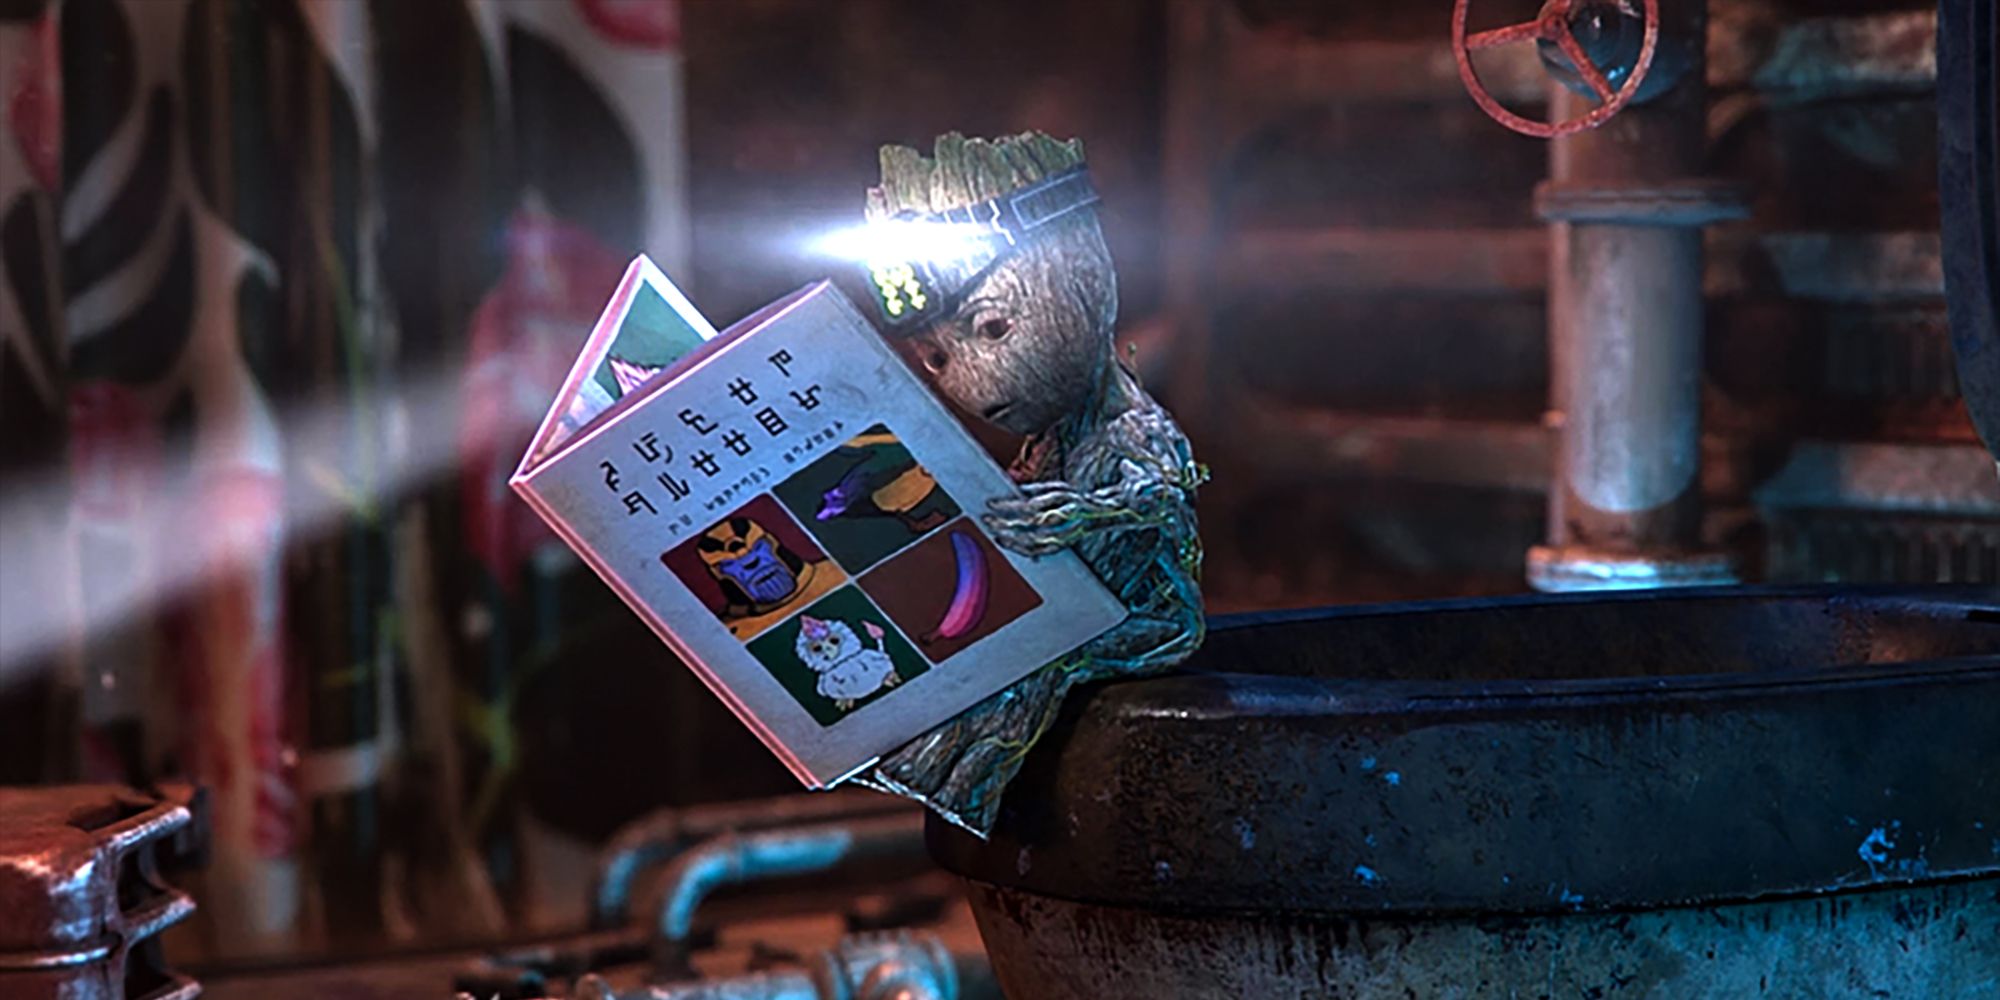 Groot Reading A Book Which Features Thanos